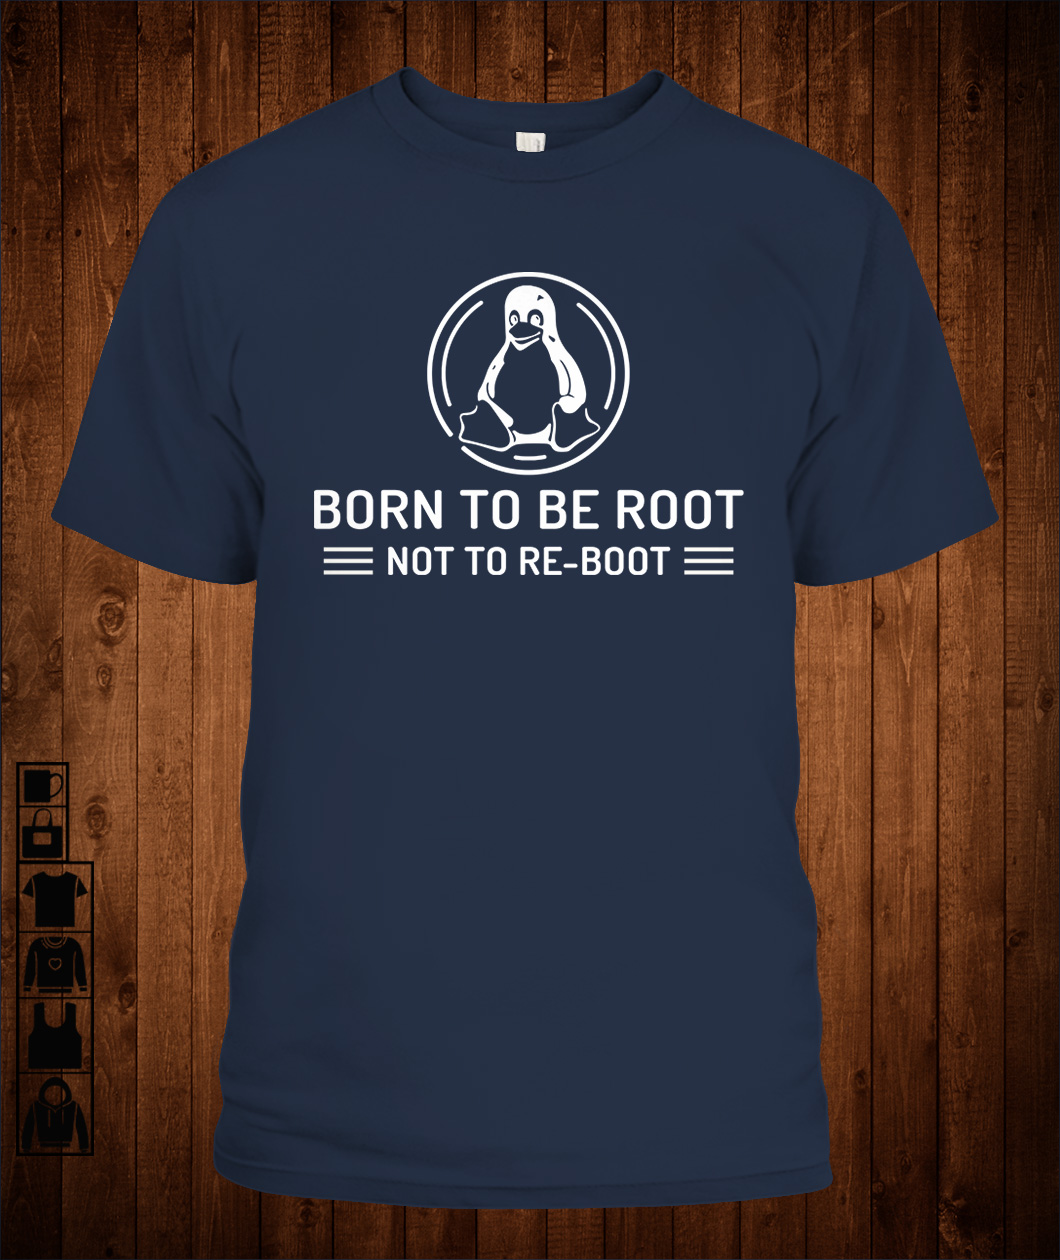 born_to_be_root.jpg